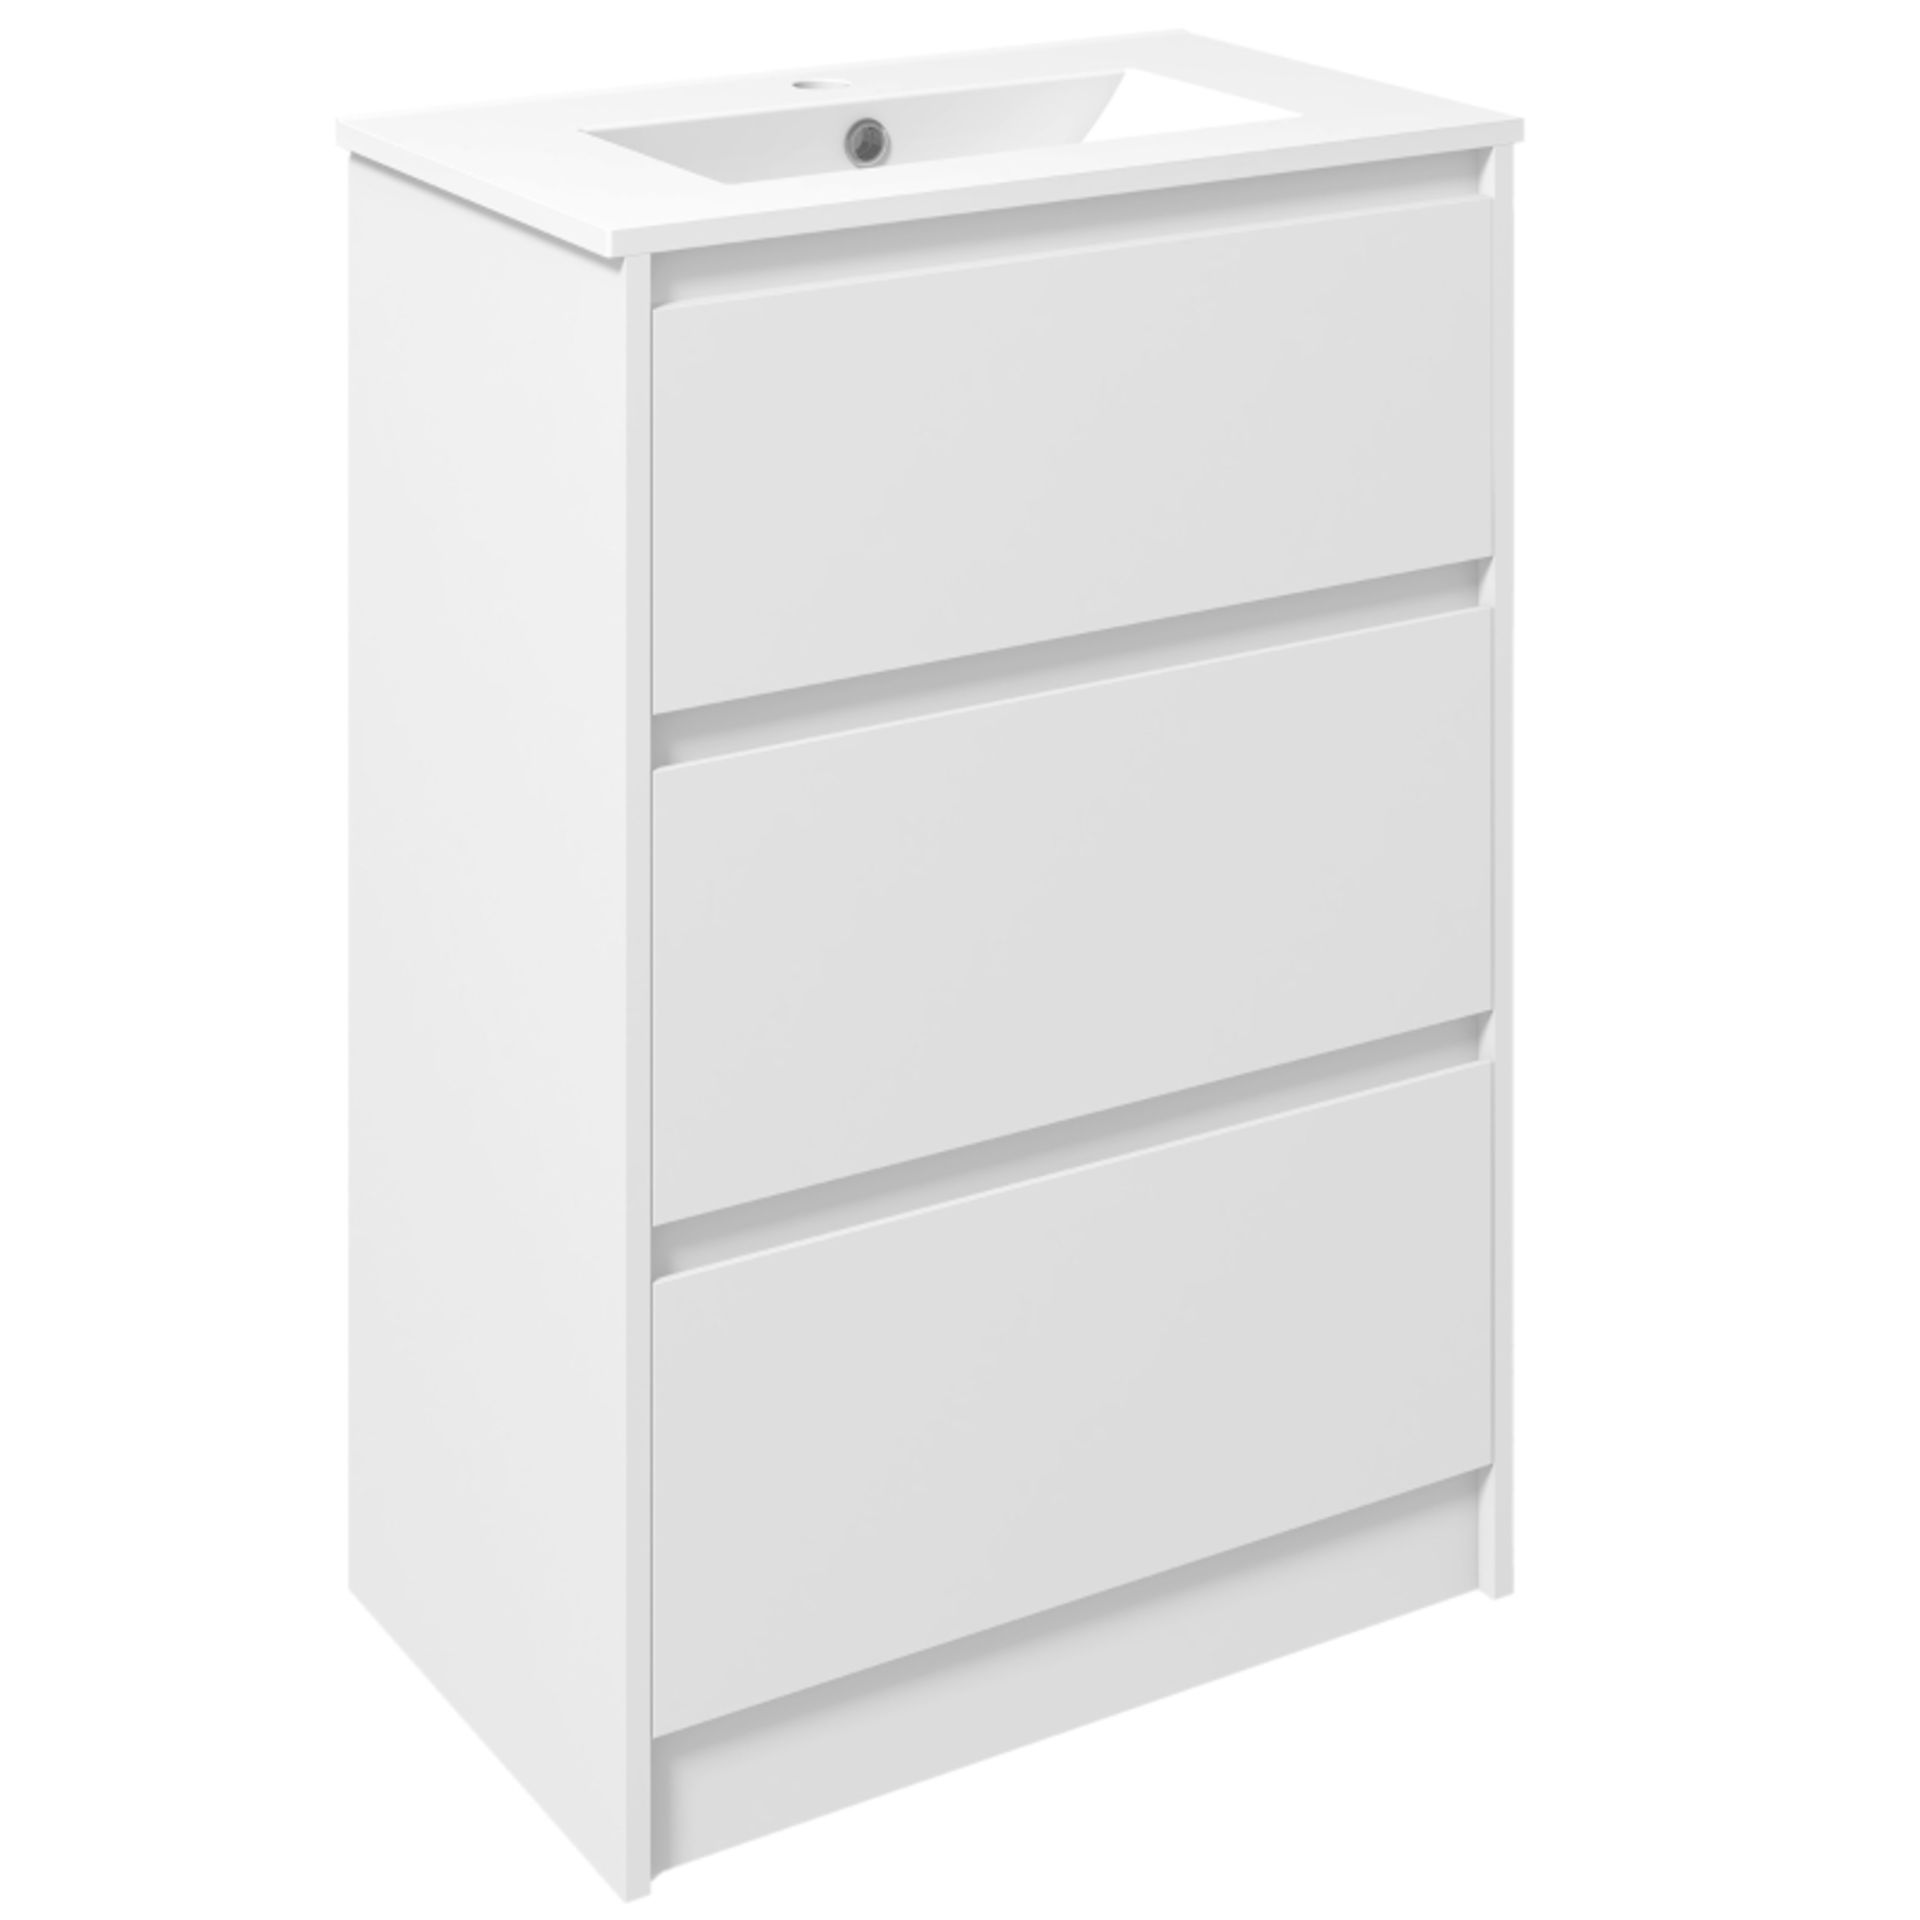 RPP £169.99 -kleankin 600mm Bathroom Vanity Unit with Basin and Single Tap Hole, High Gloss White